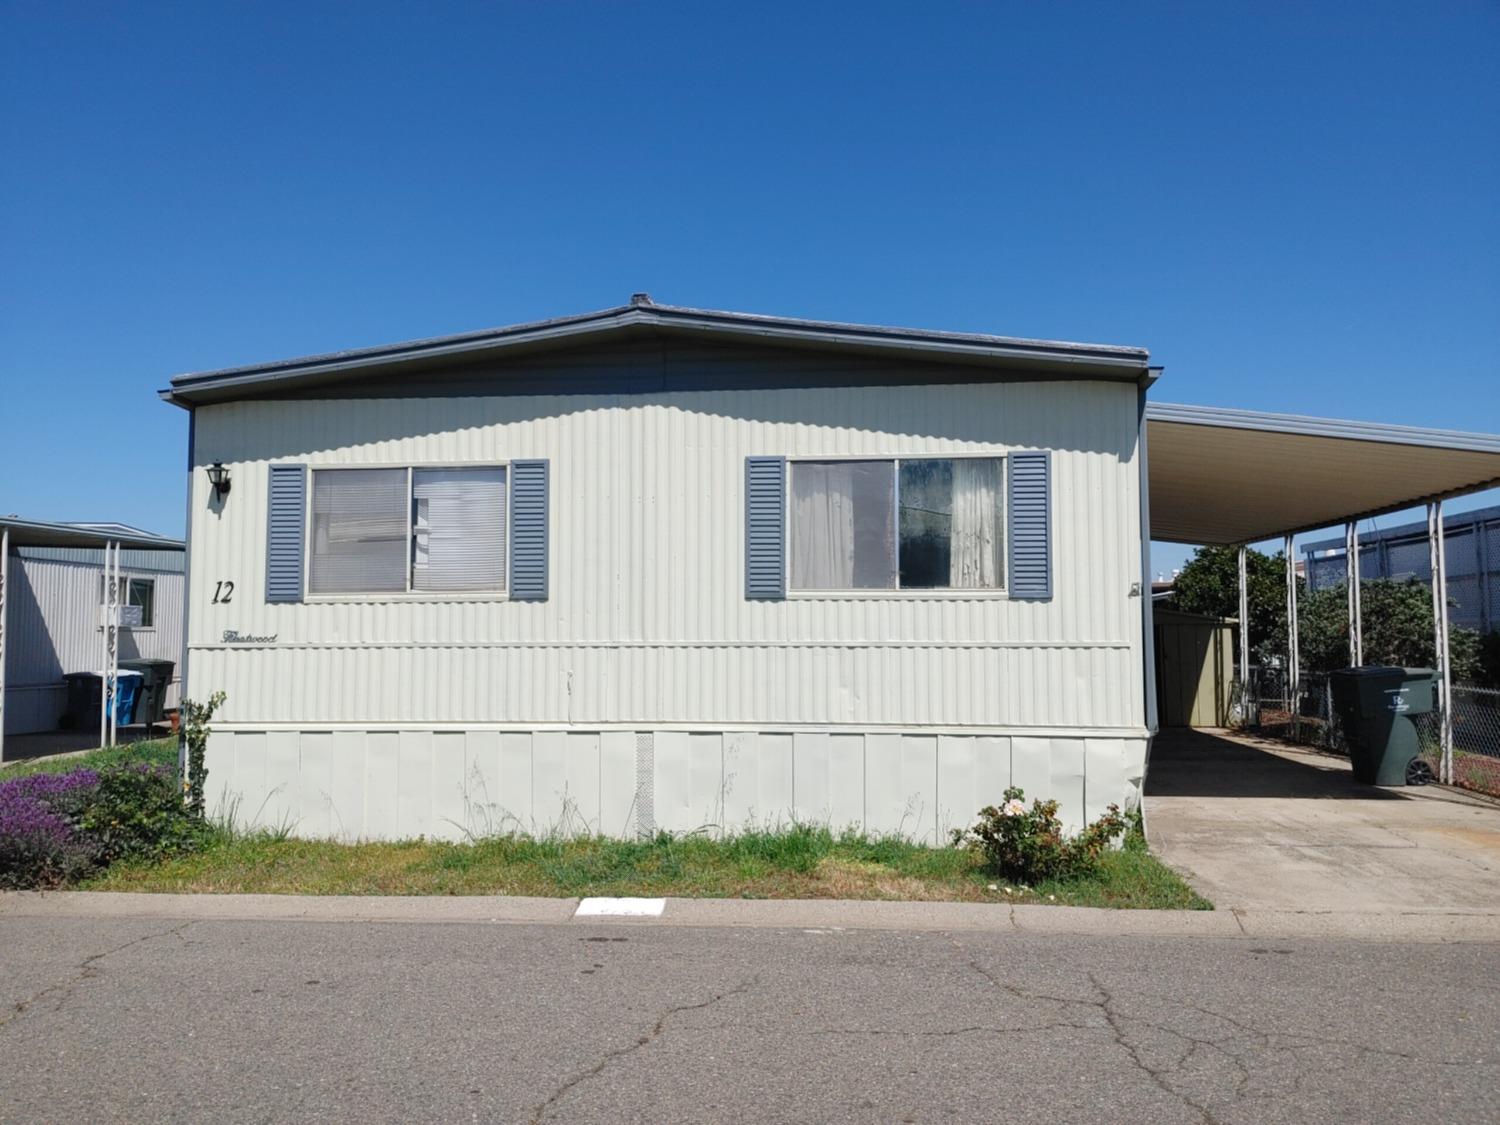 Photo of 1155 Pease Rd #12 in Yuba City, CA